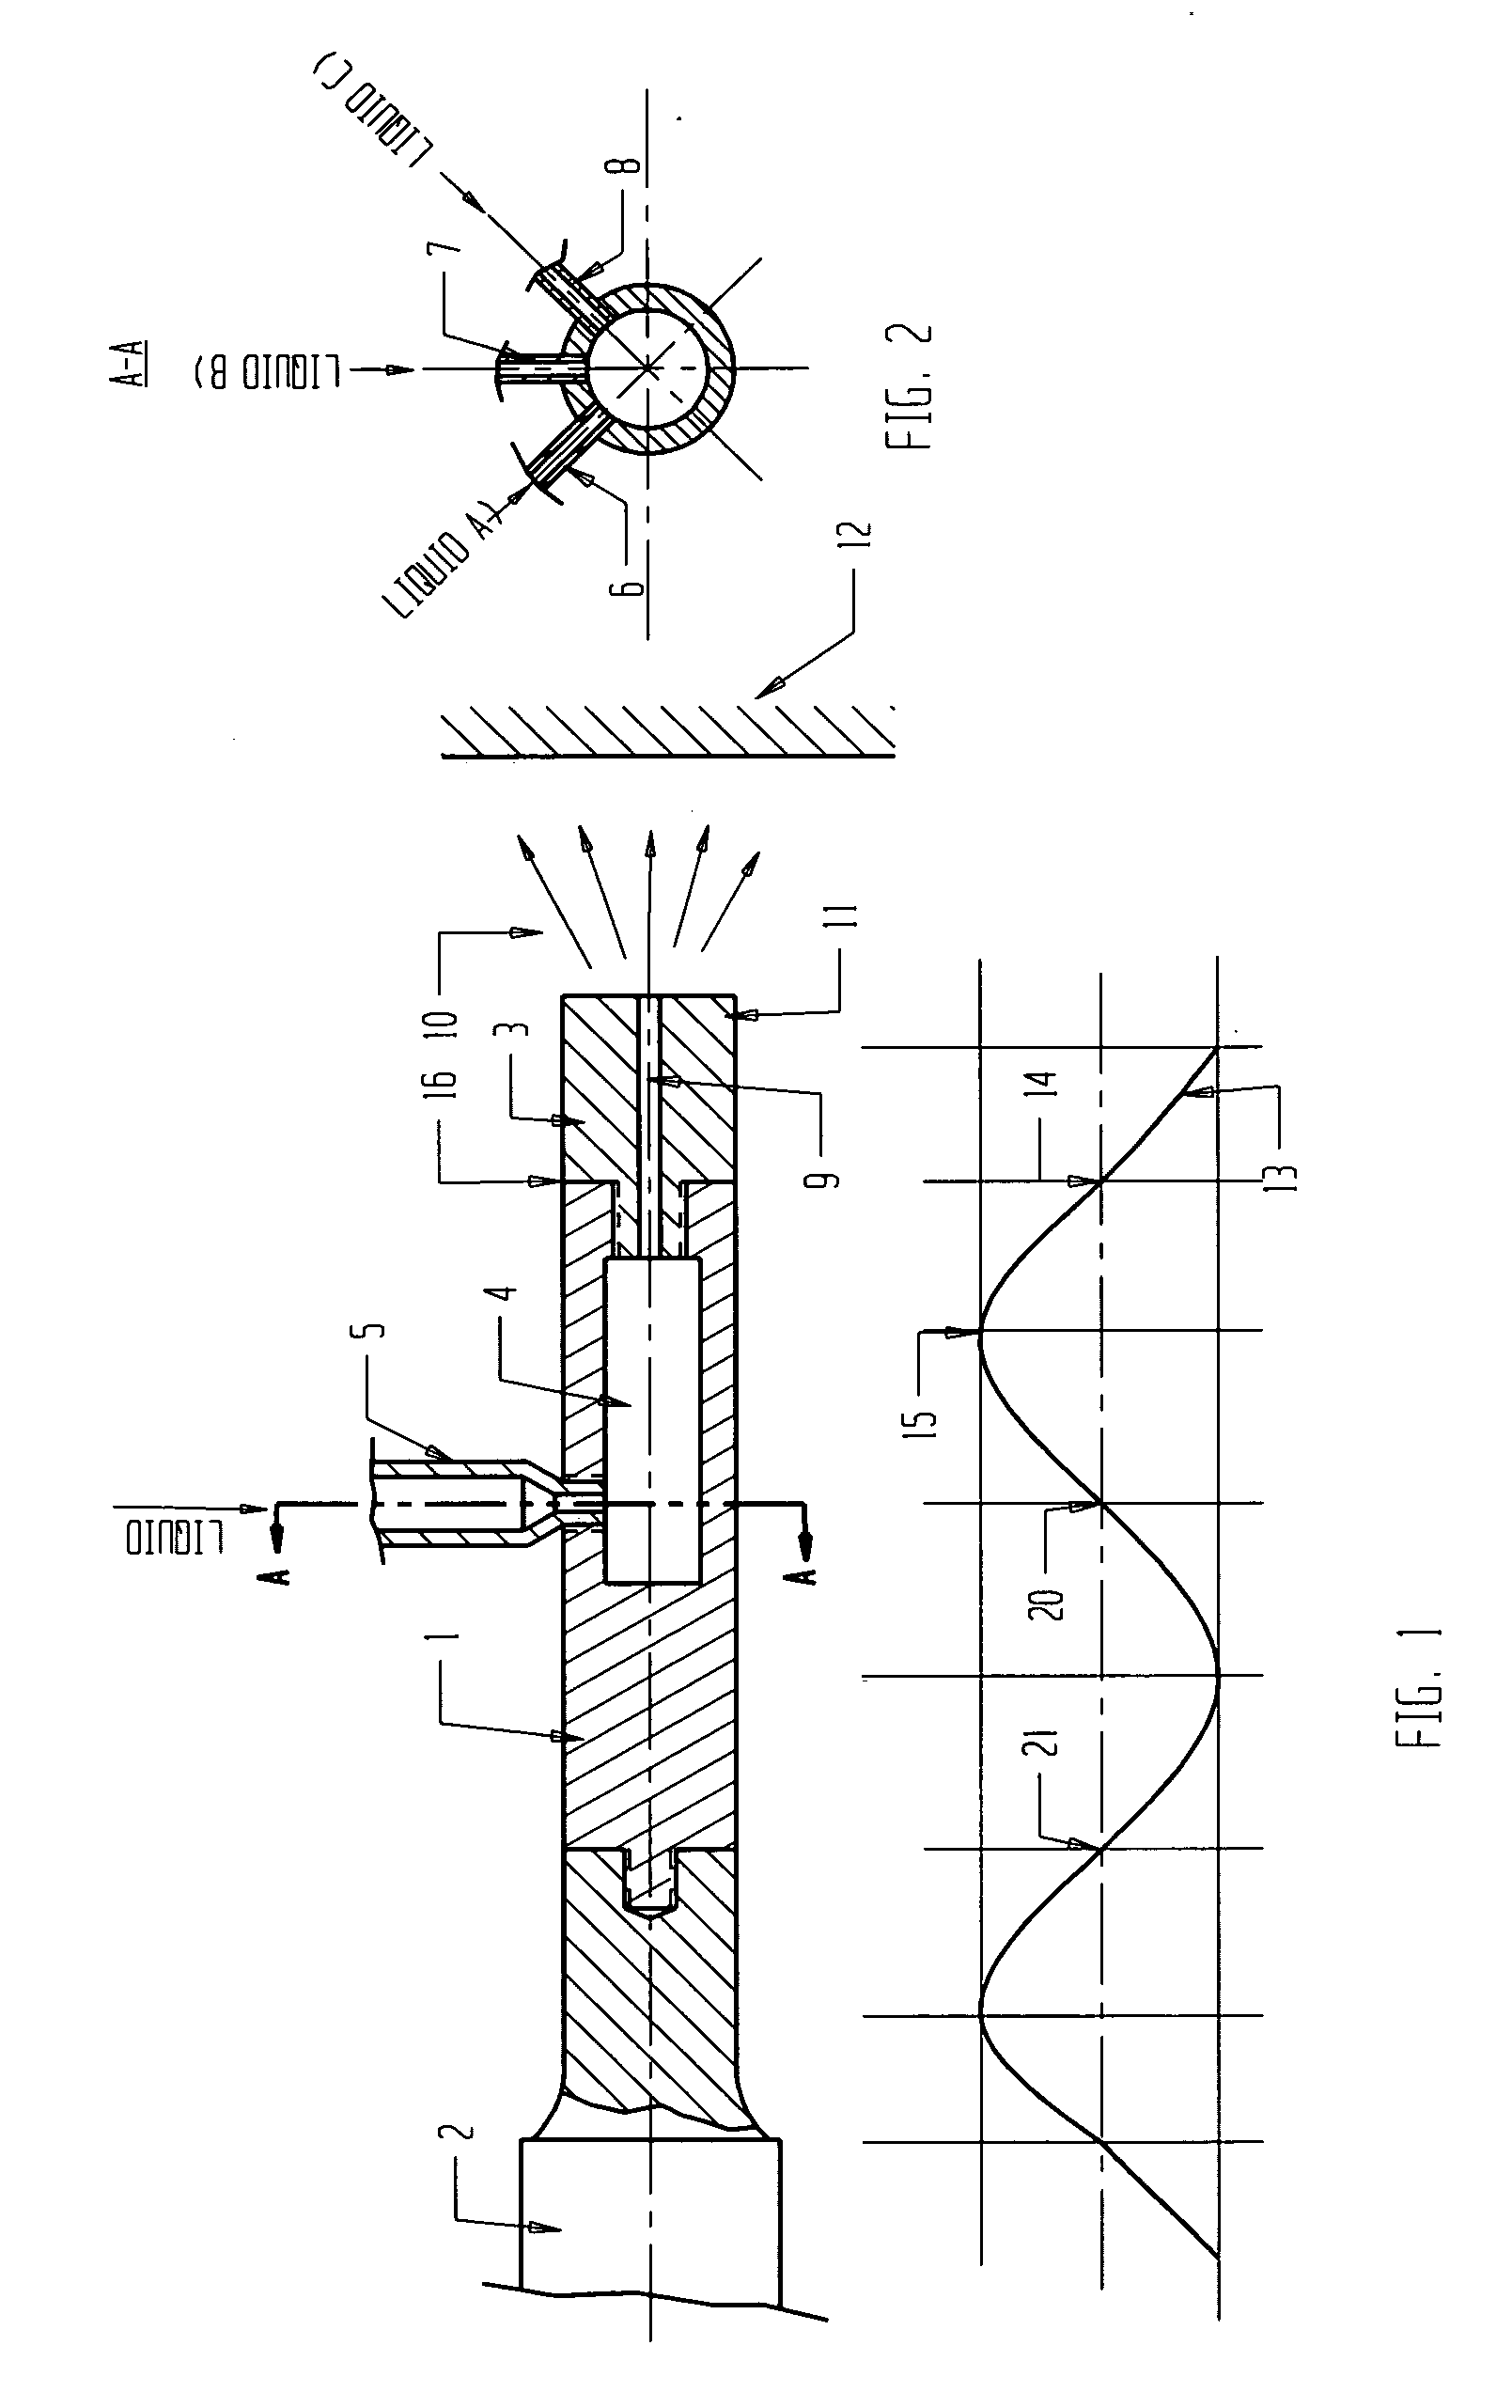 Ultrasound apparatus and methods for mixing liquids and coating stents